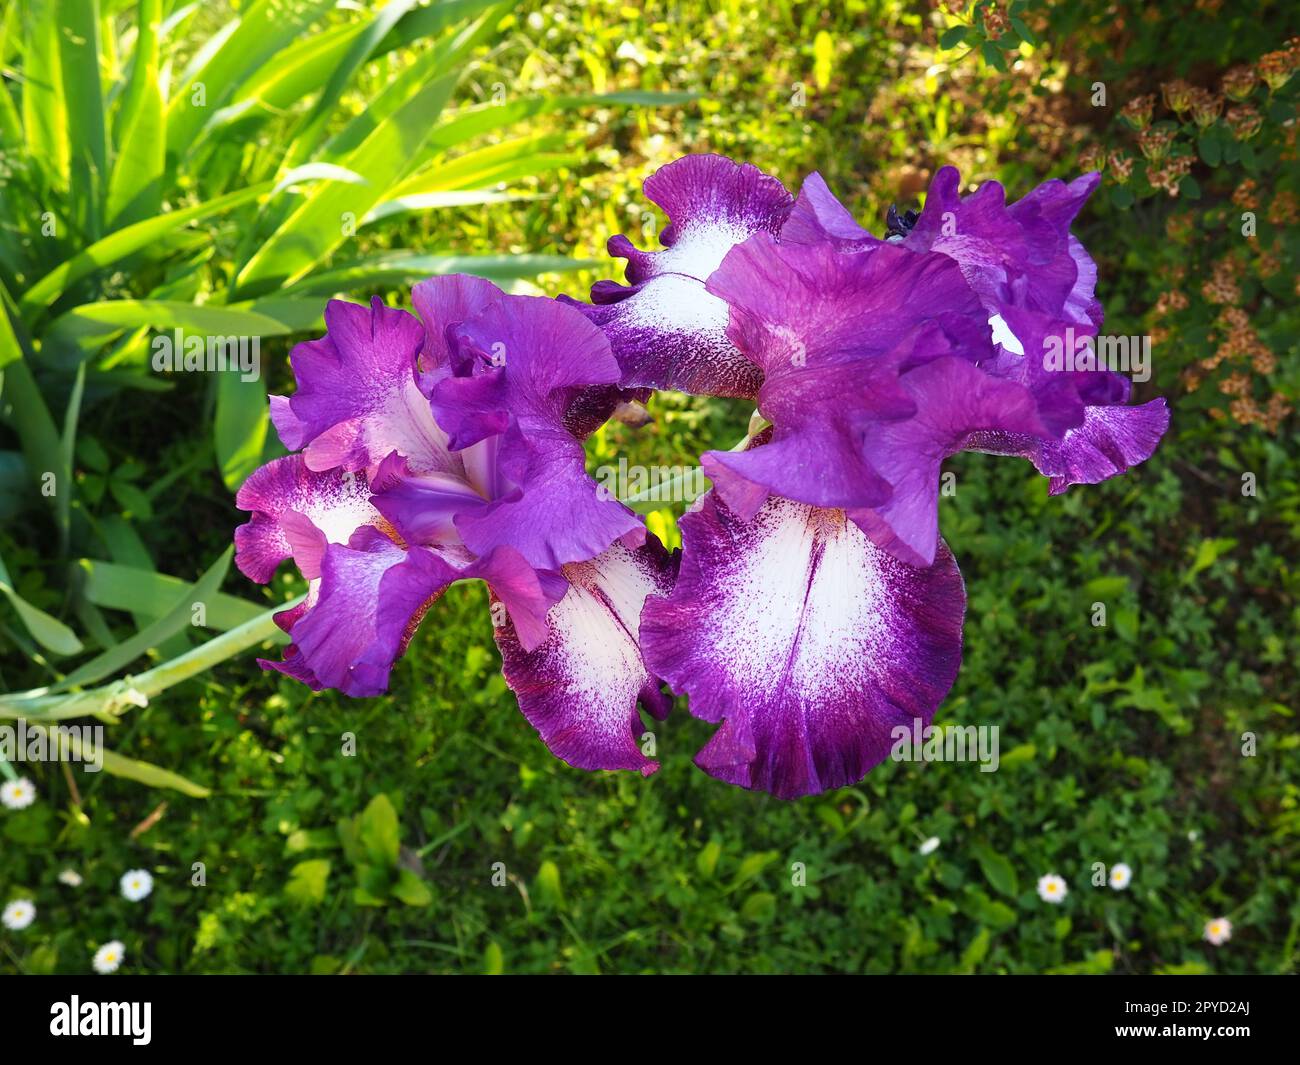 Beautiful colorful iris flowers close-up. Violet flowers in the summer. Two dainty beautiful flowers on one stem. Green leaves. Botany, plant growing, floriculture and gardening Stock Photo